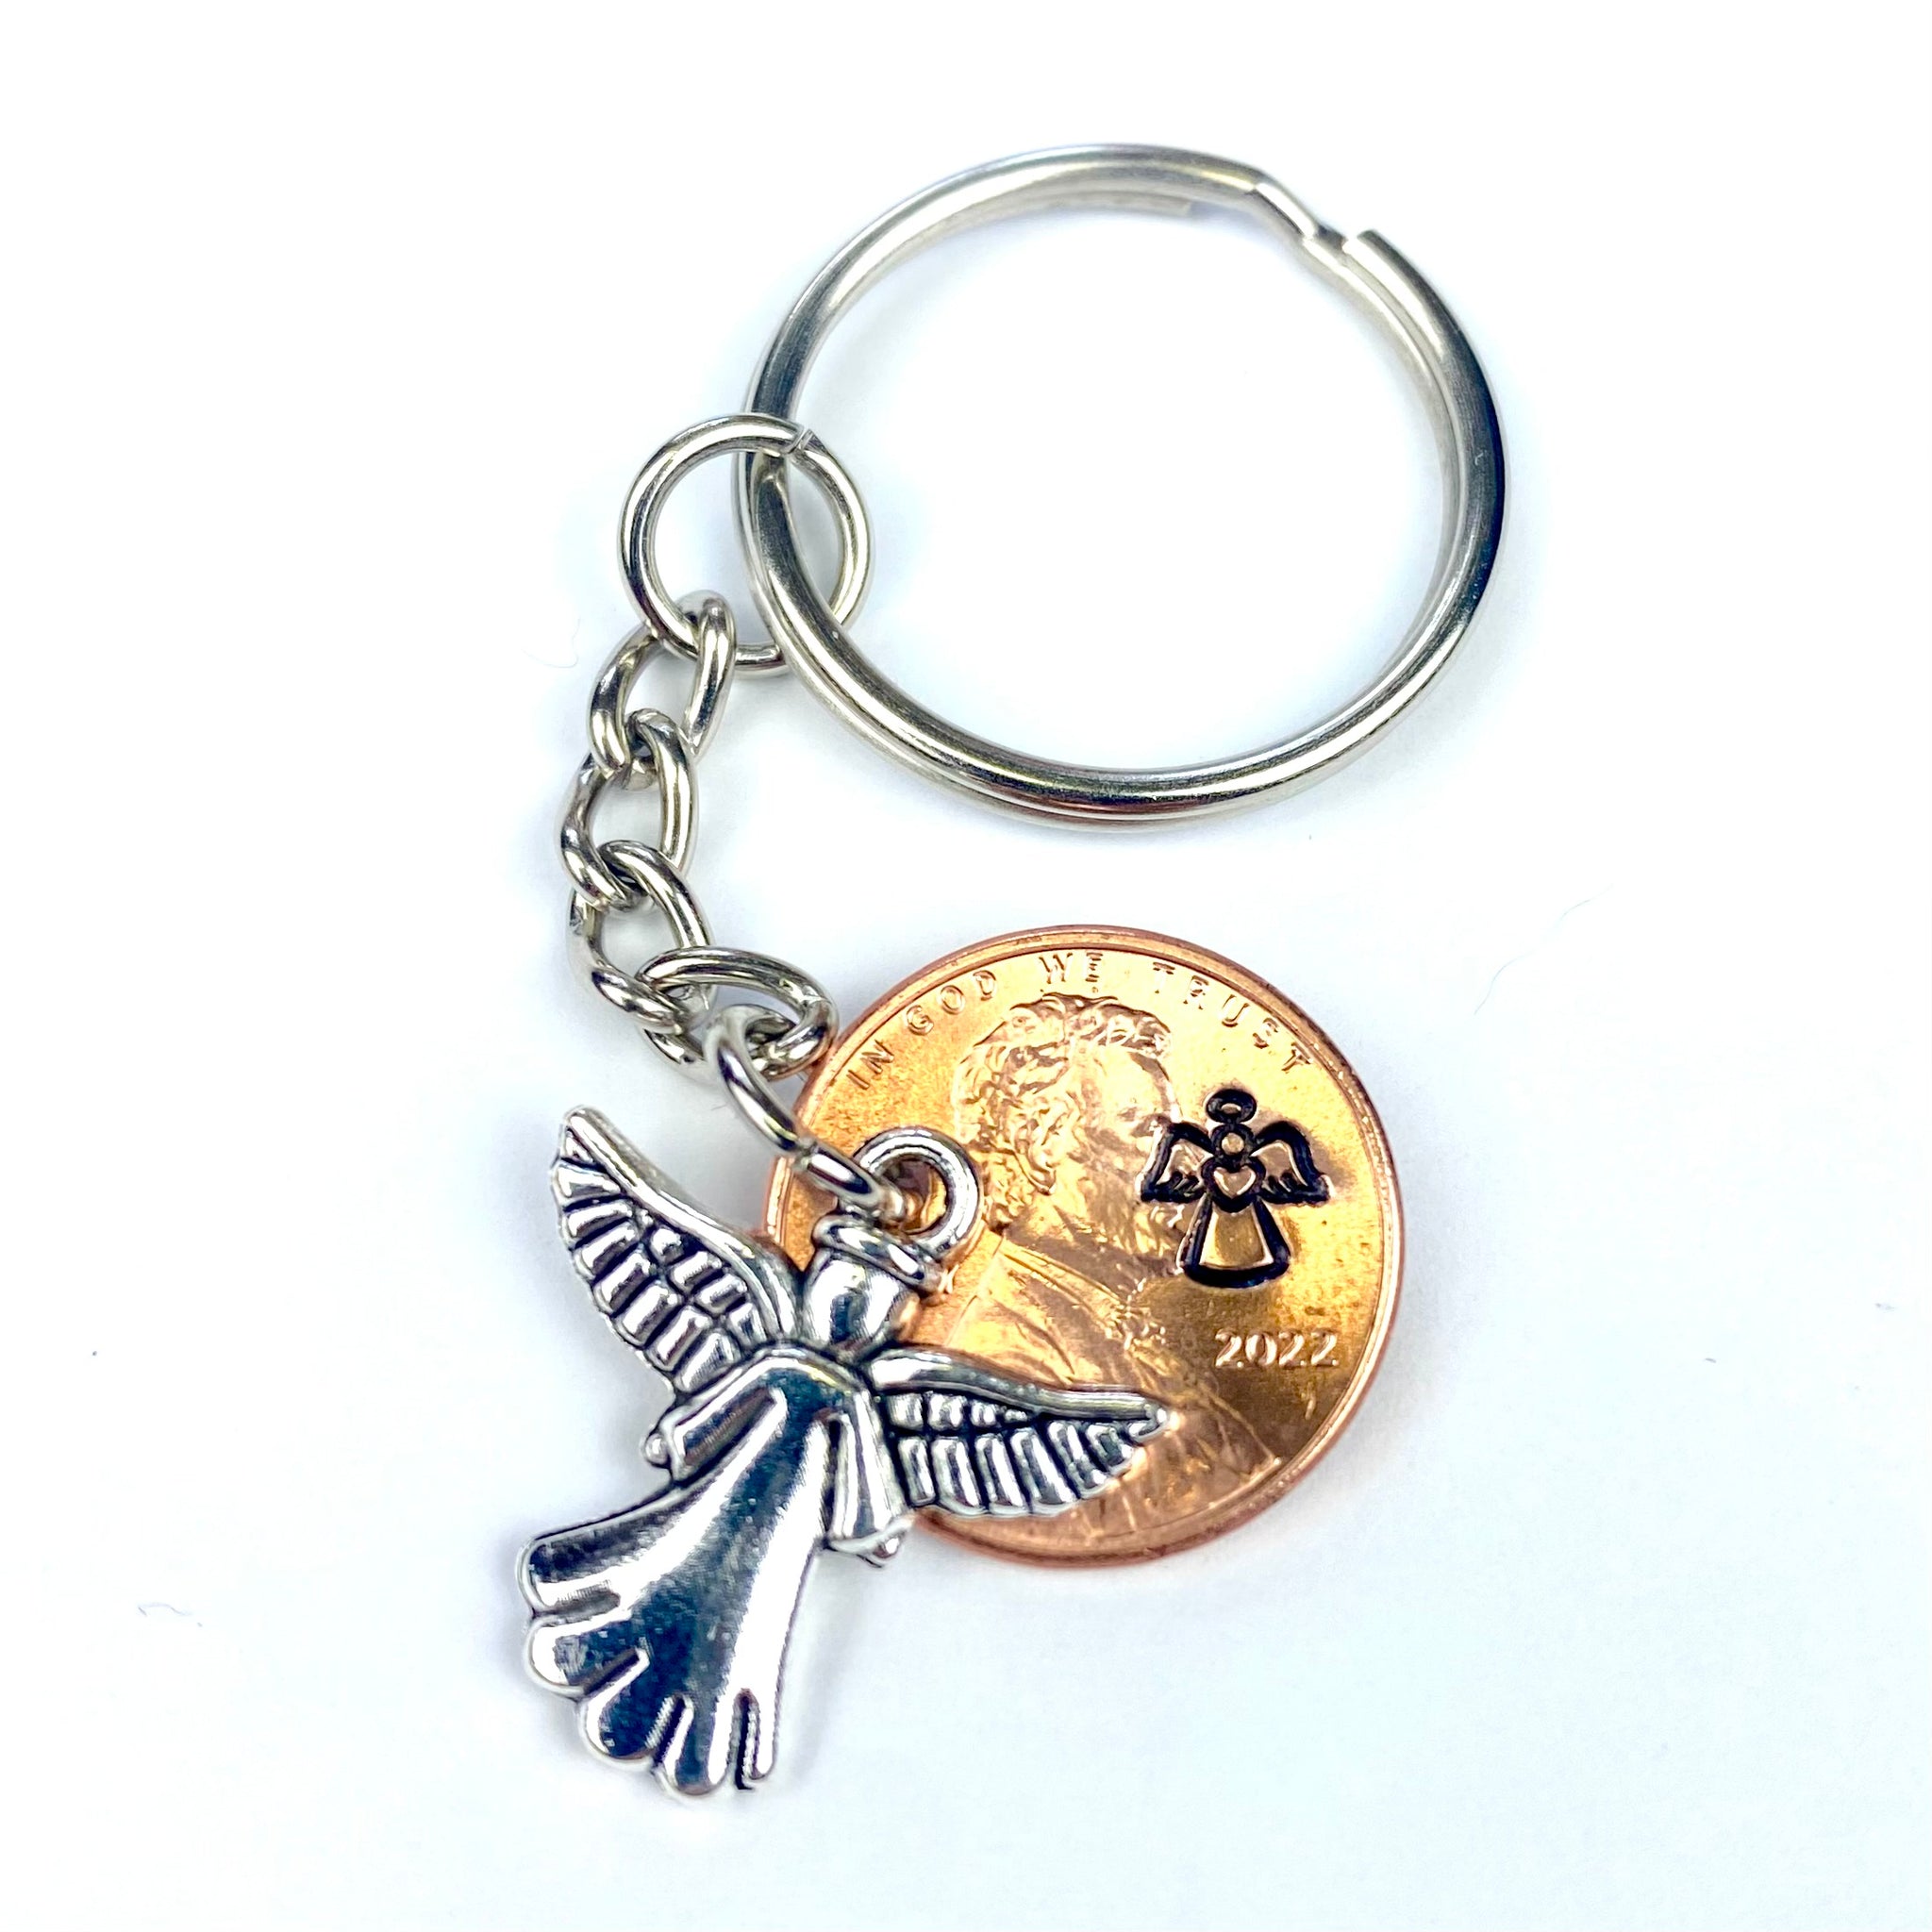 Choose an Angel Lucky Penny Keychain to remember your loved one. The silver angel charm is perfect with the hand stamped angel on this penny.